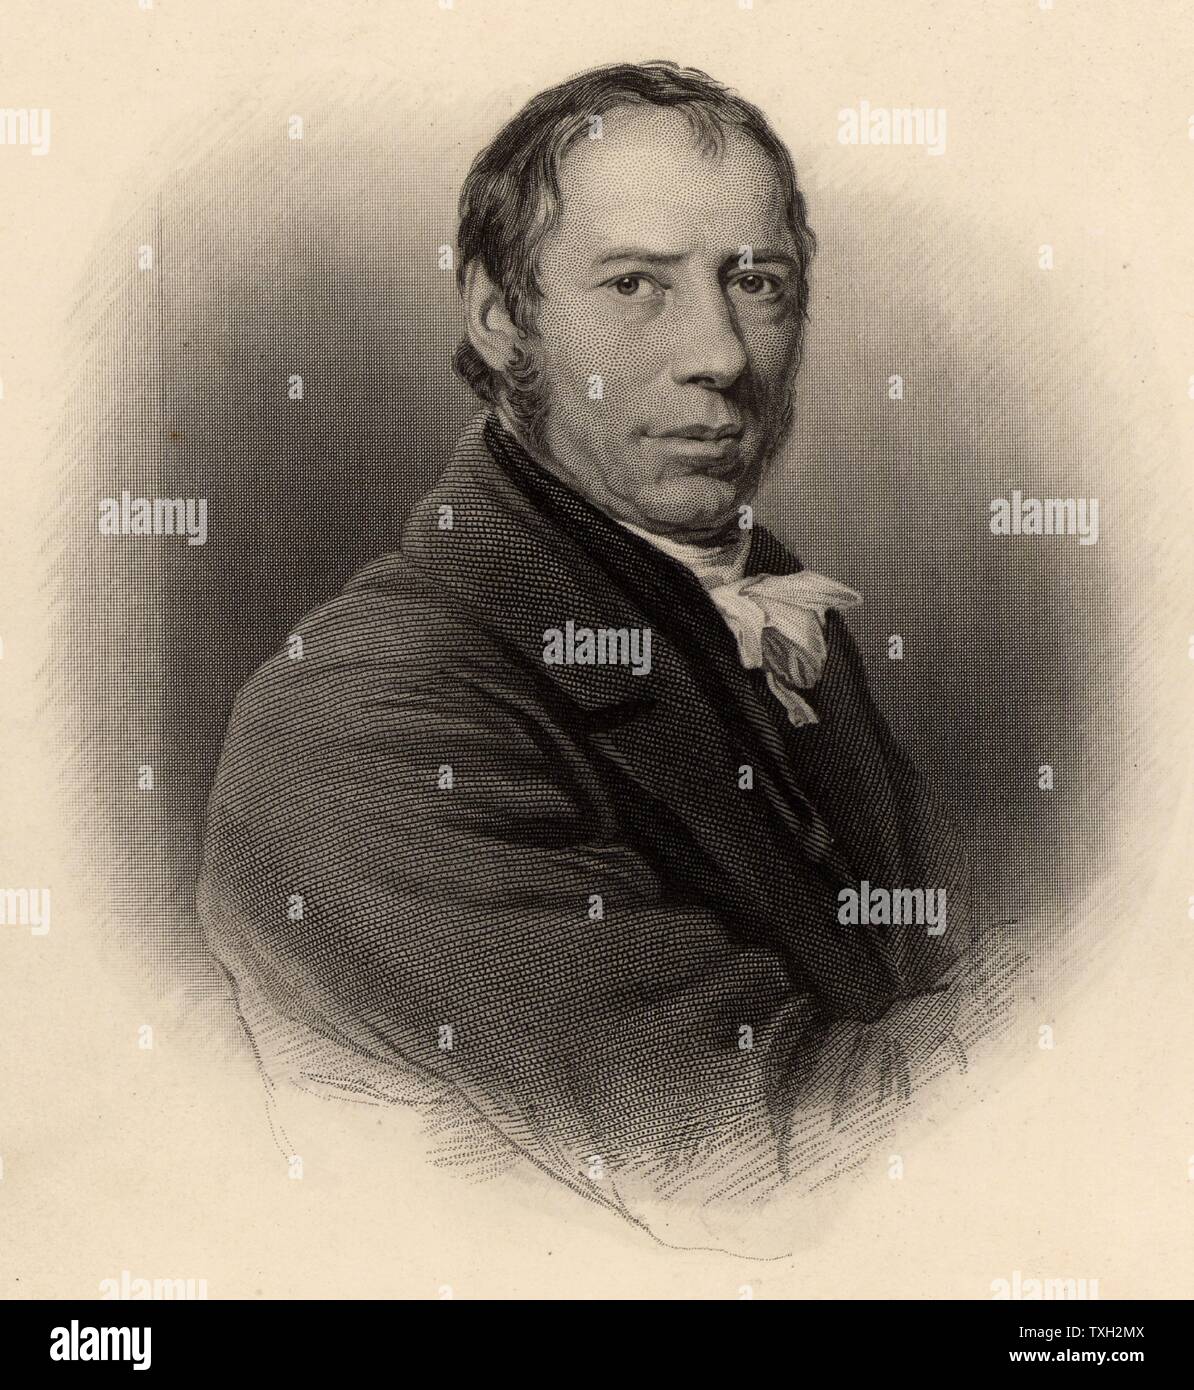 Richard Trevithick (1771-1833) English engineer and inventor, born near Redruth, Cornwall.  Between 1800and 1815 he built a number of steam-powered road  vehicles and railway locomotives. Engraving from 'Life of Richard Trevithick' by Francis Trevithick (London, 1872). Stock Photo